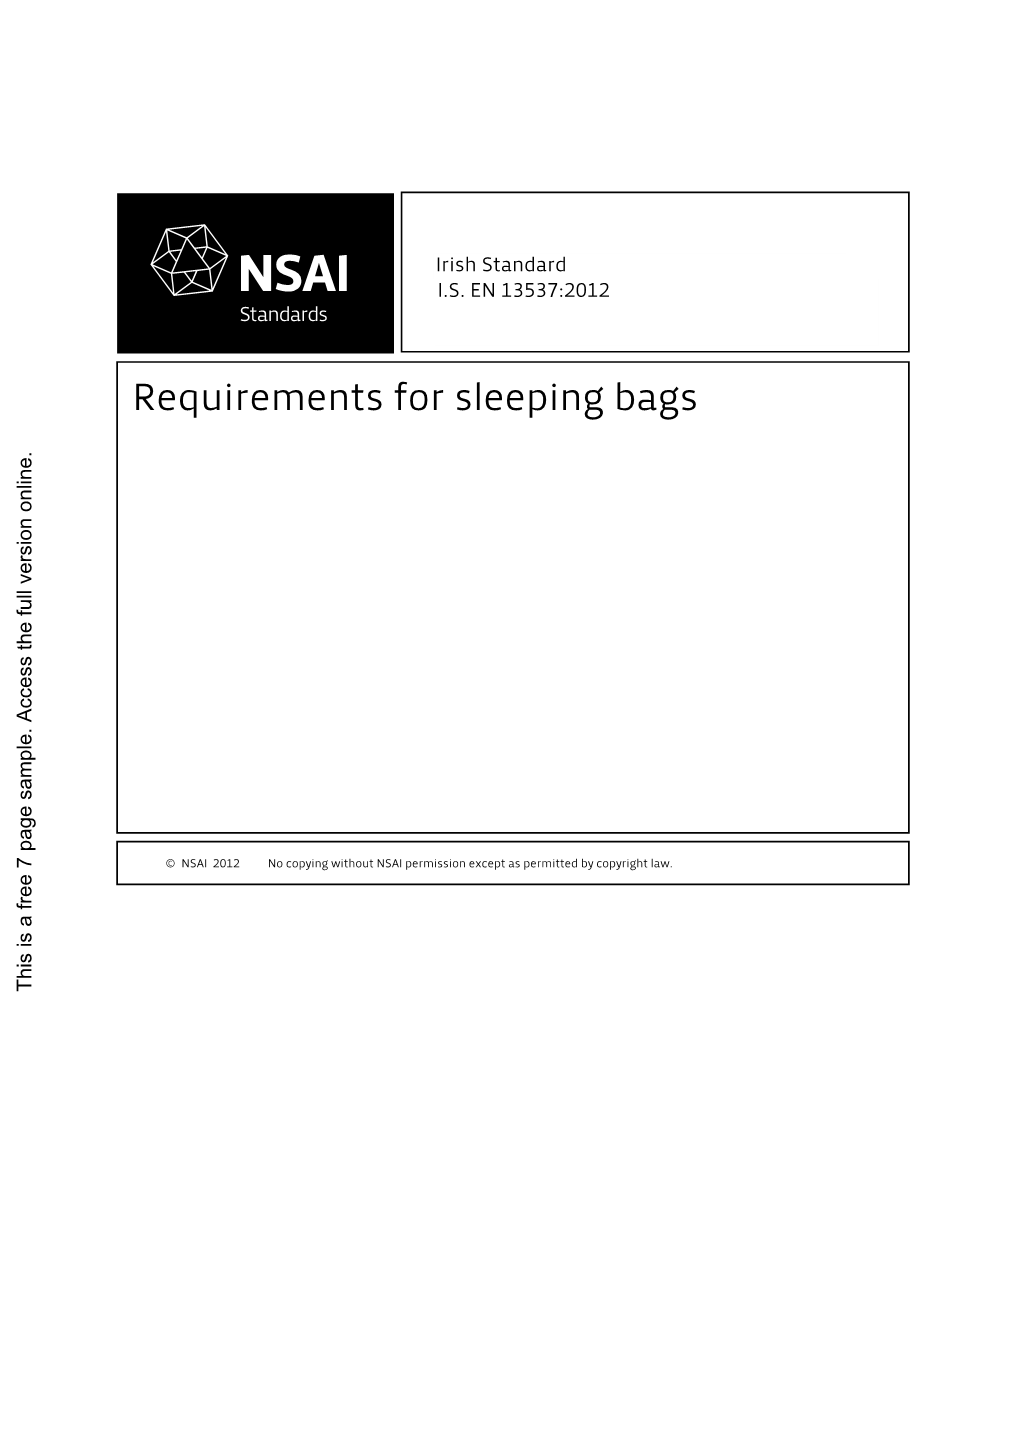 Requirements for Sleeping Bags